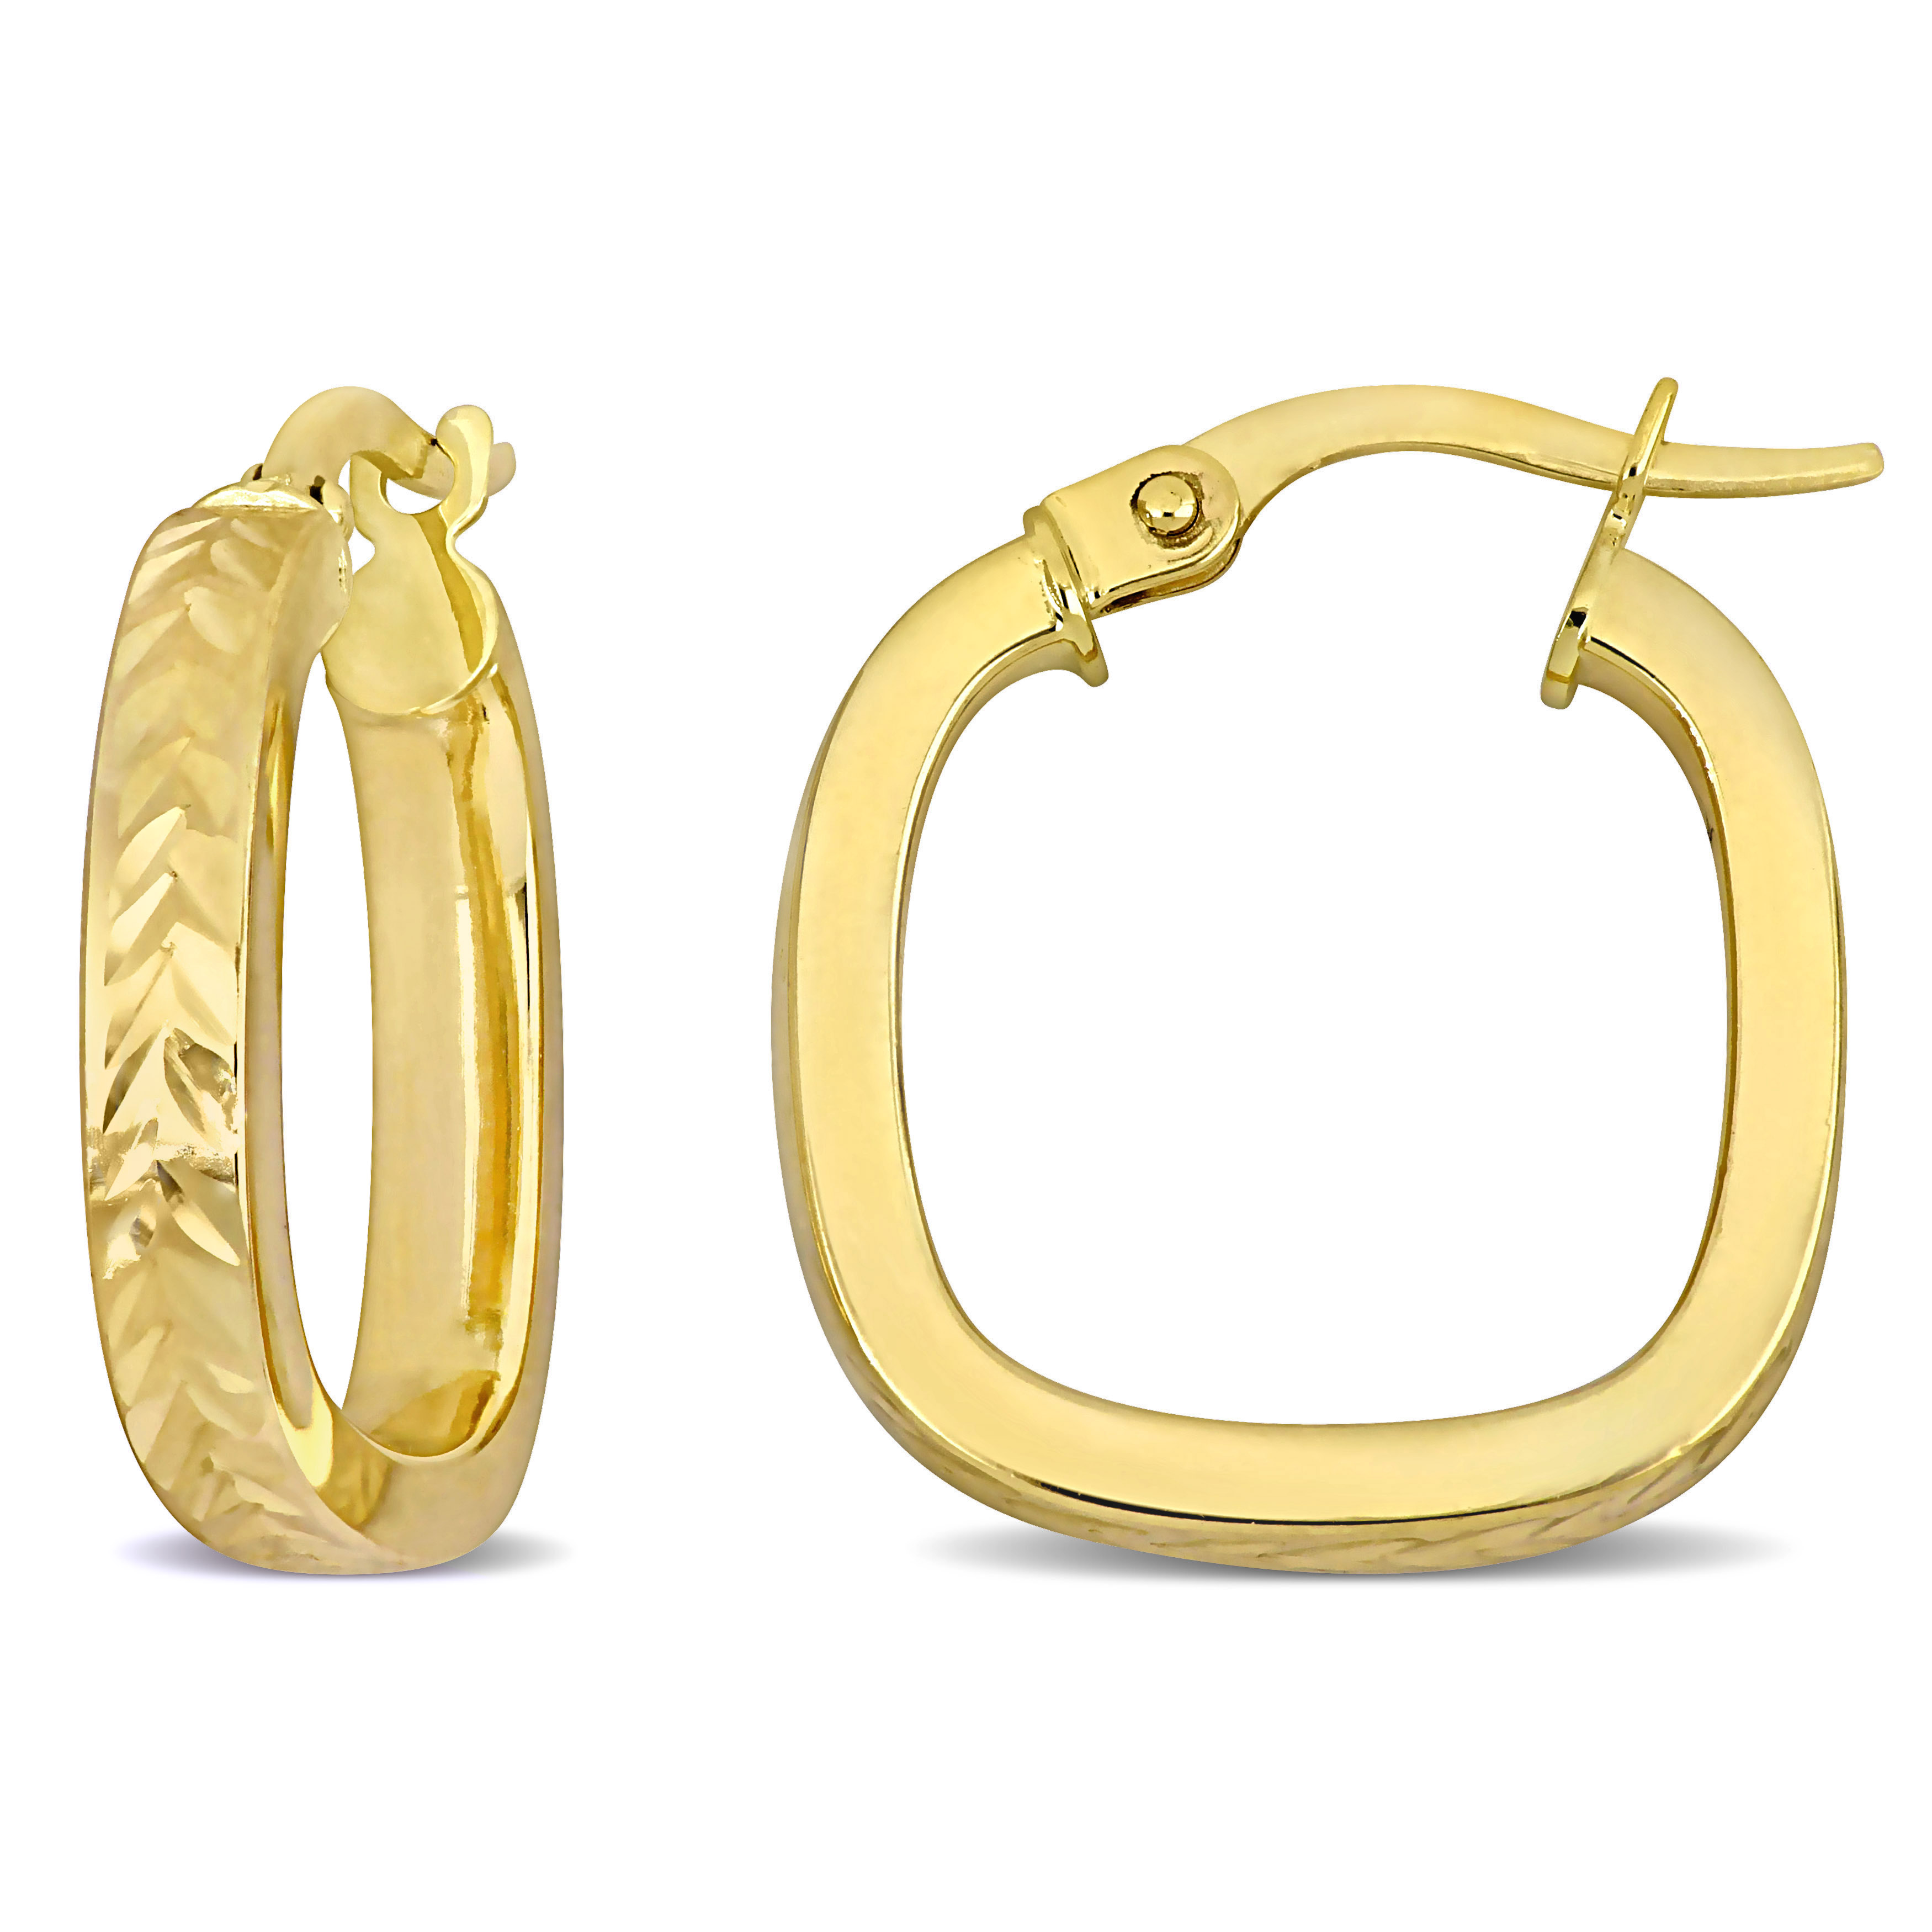 19 MM Textured Square Hoop Earrings in 10k Yellow Gold